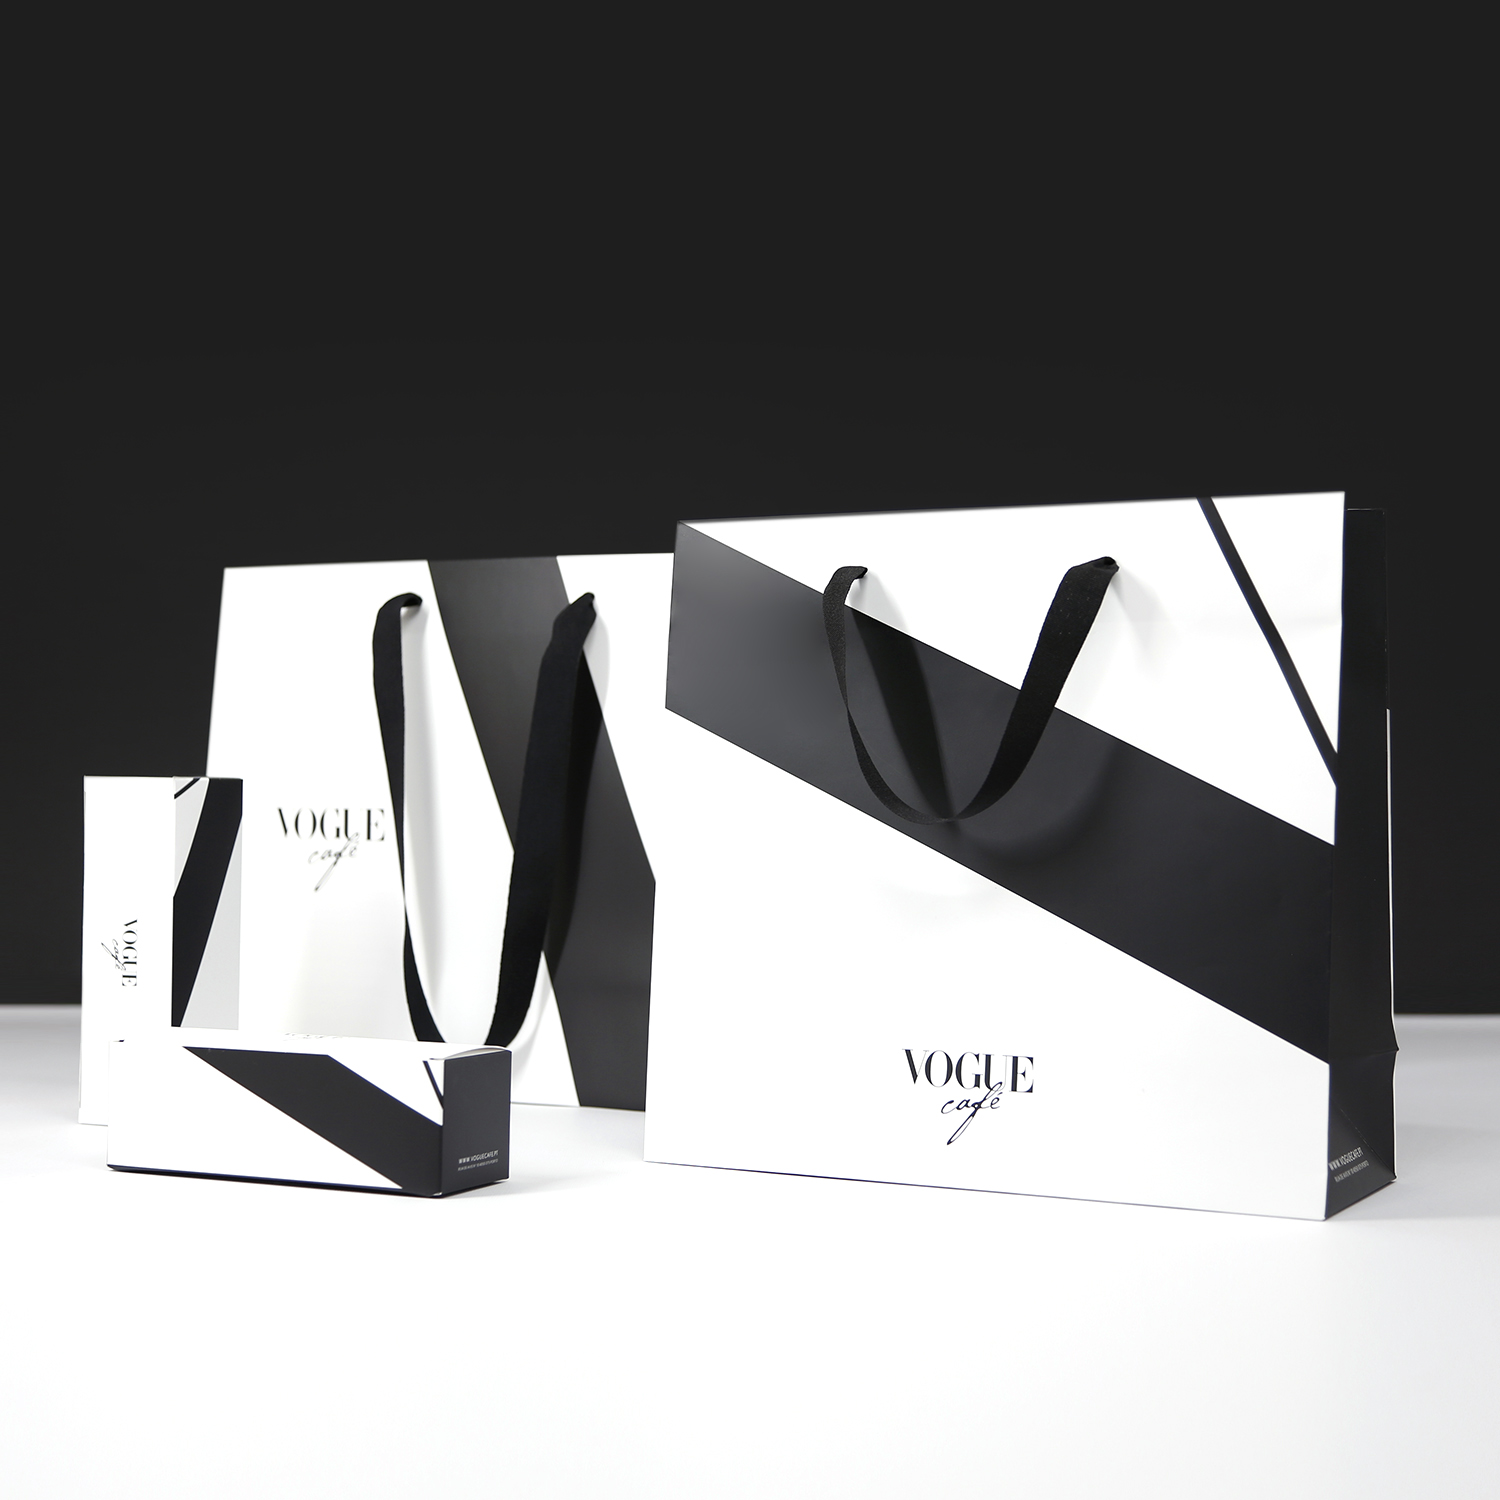 Luxury shopping bags and boxes vogue cafe by grafislab